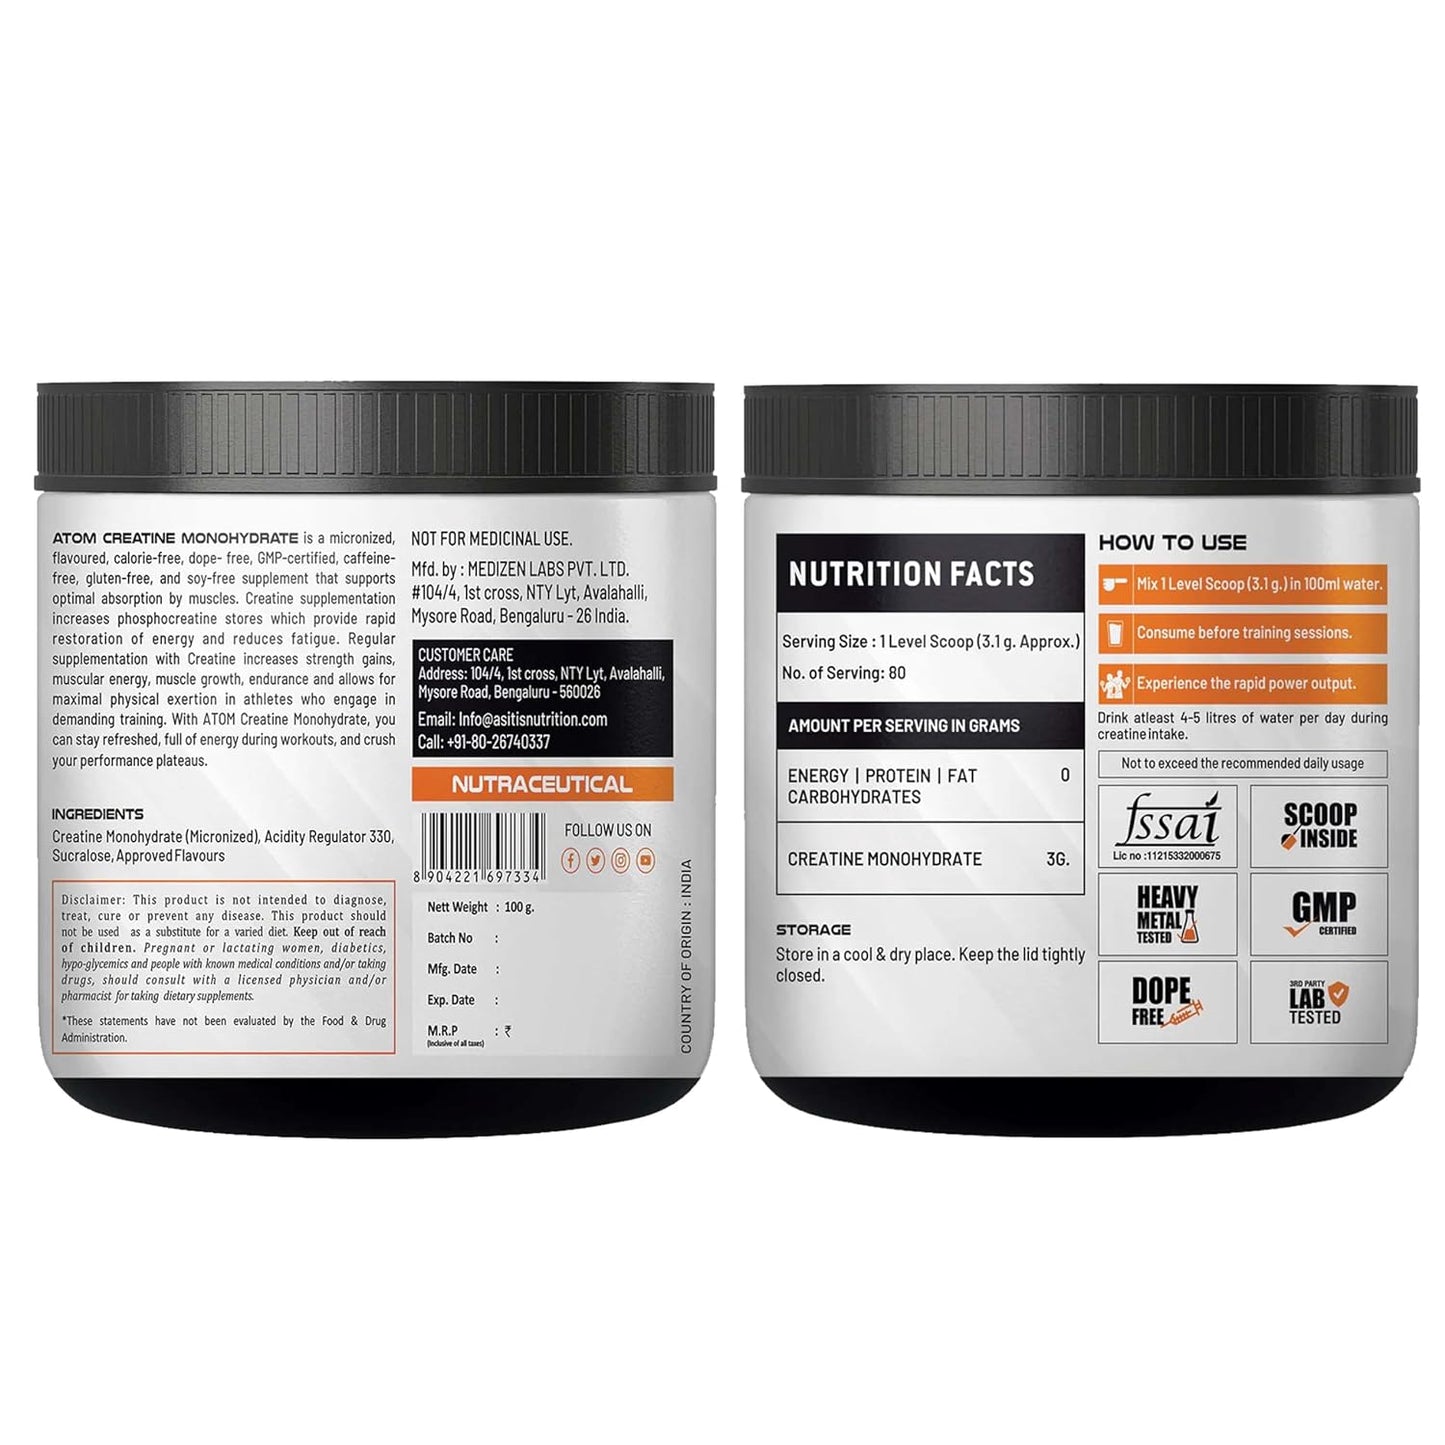 As-it-is ATOM Creatine Monohydrate